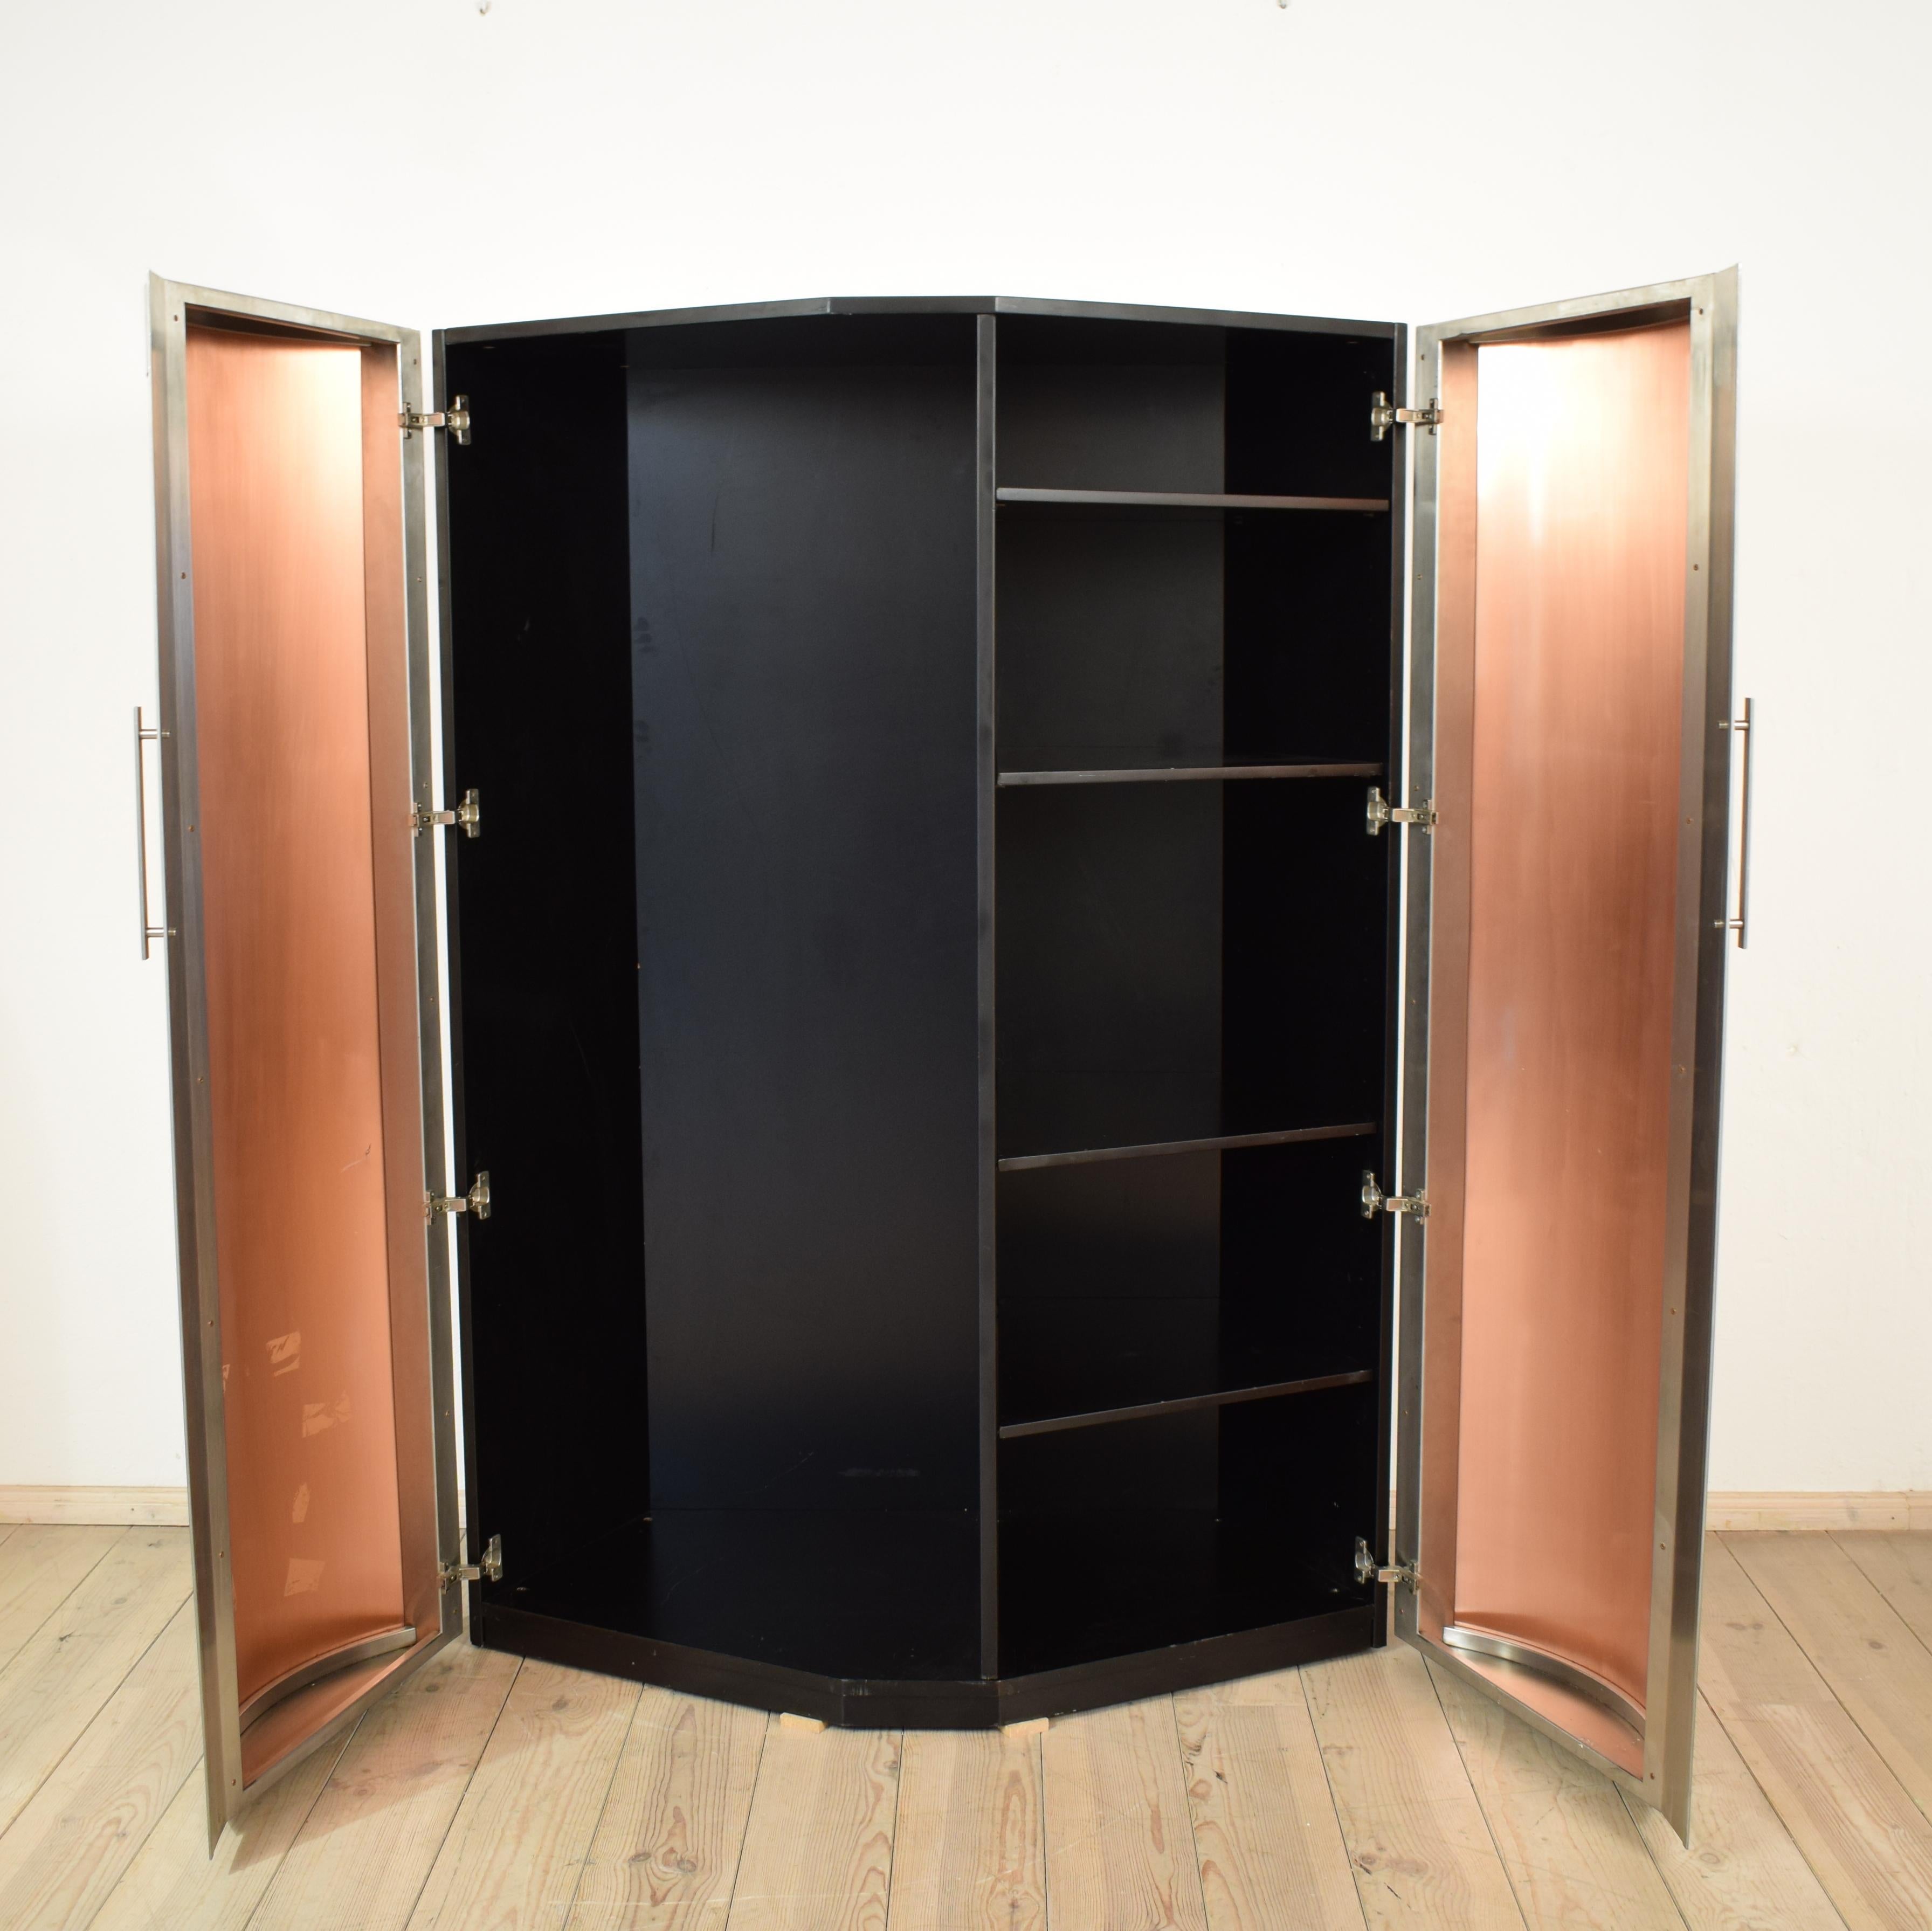 1980s Corner Cabinet / Cabinet with Copper Doors (Space Age)